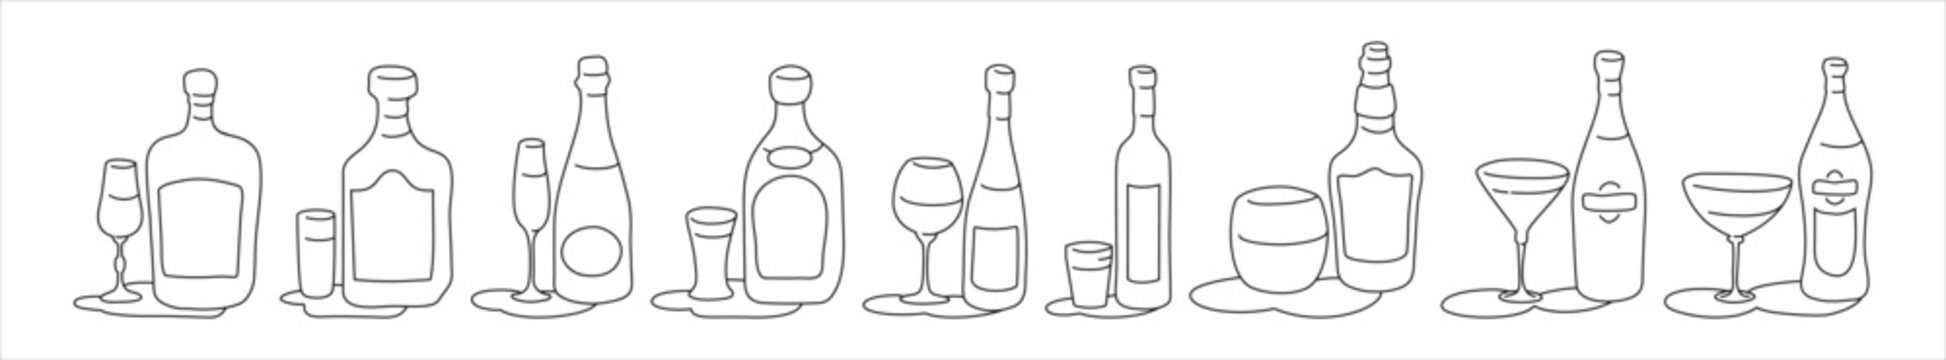 Liquor rum champagne tequila wine vodka whiskey martini vermouth bottle and glass outline icon on white background. Black white cartoon sketch graphic design. Doodle style. Hand drawn image.